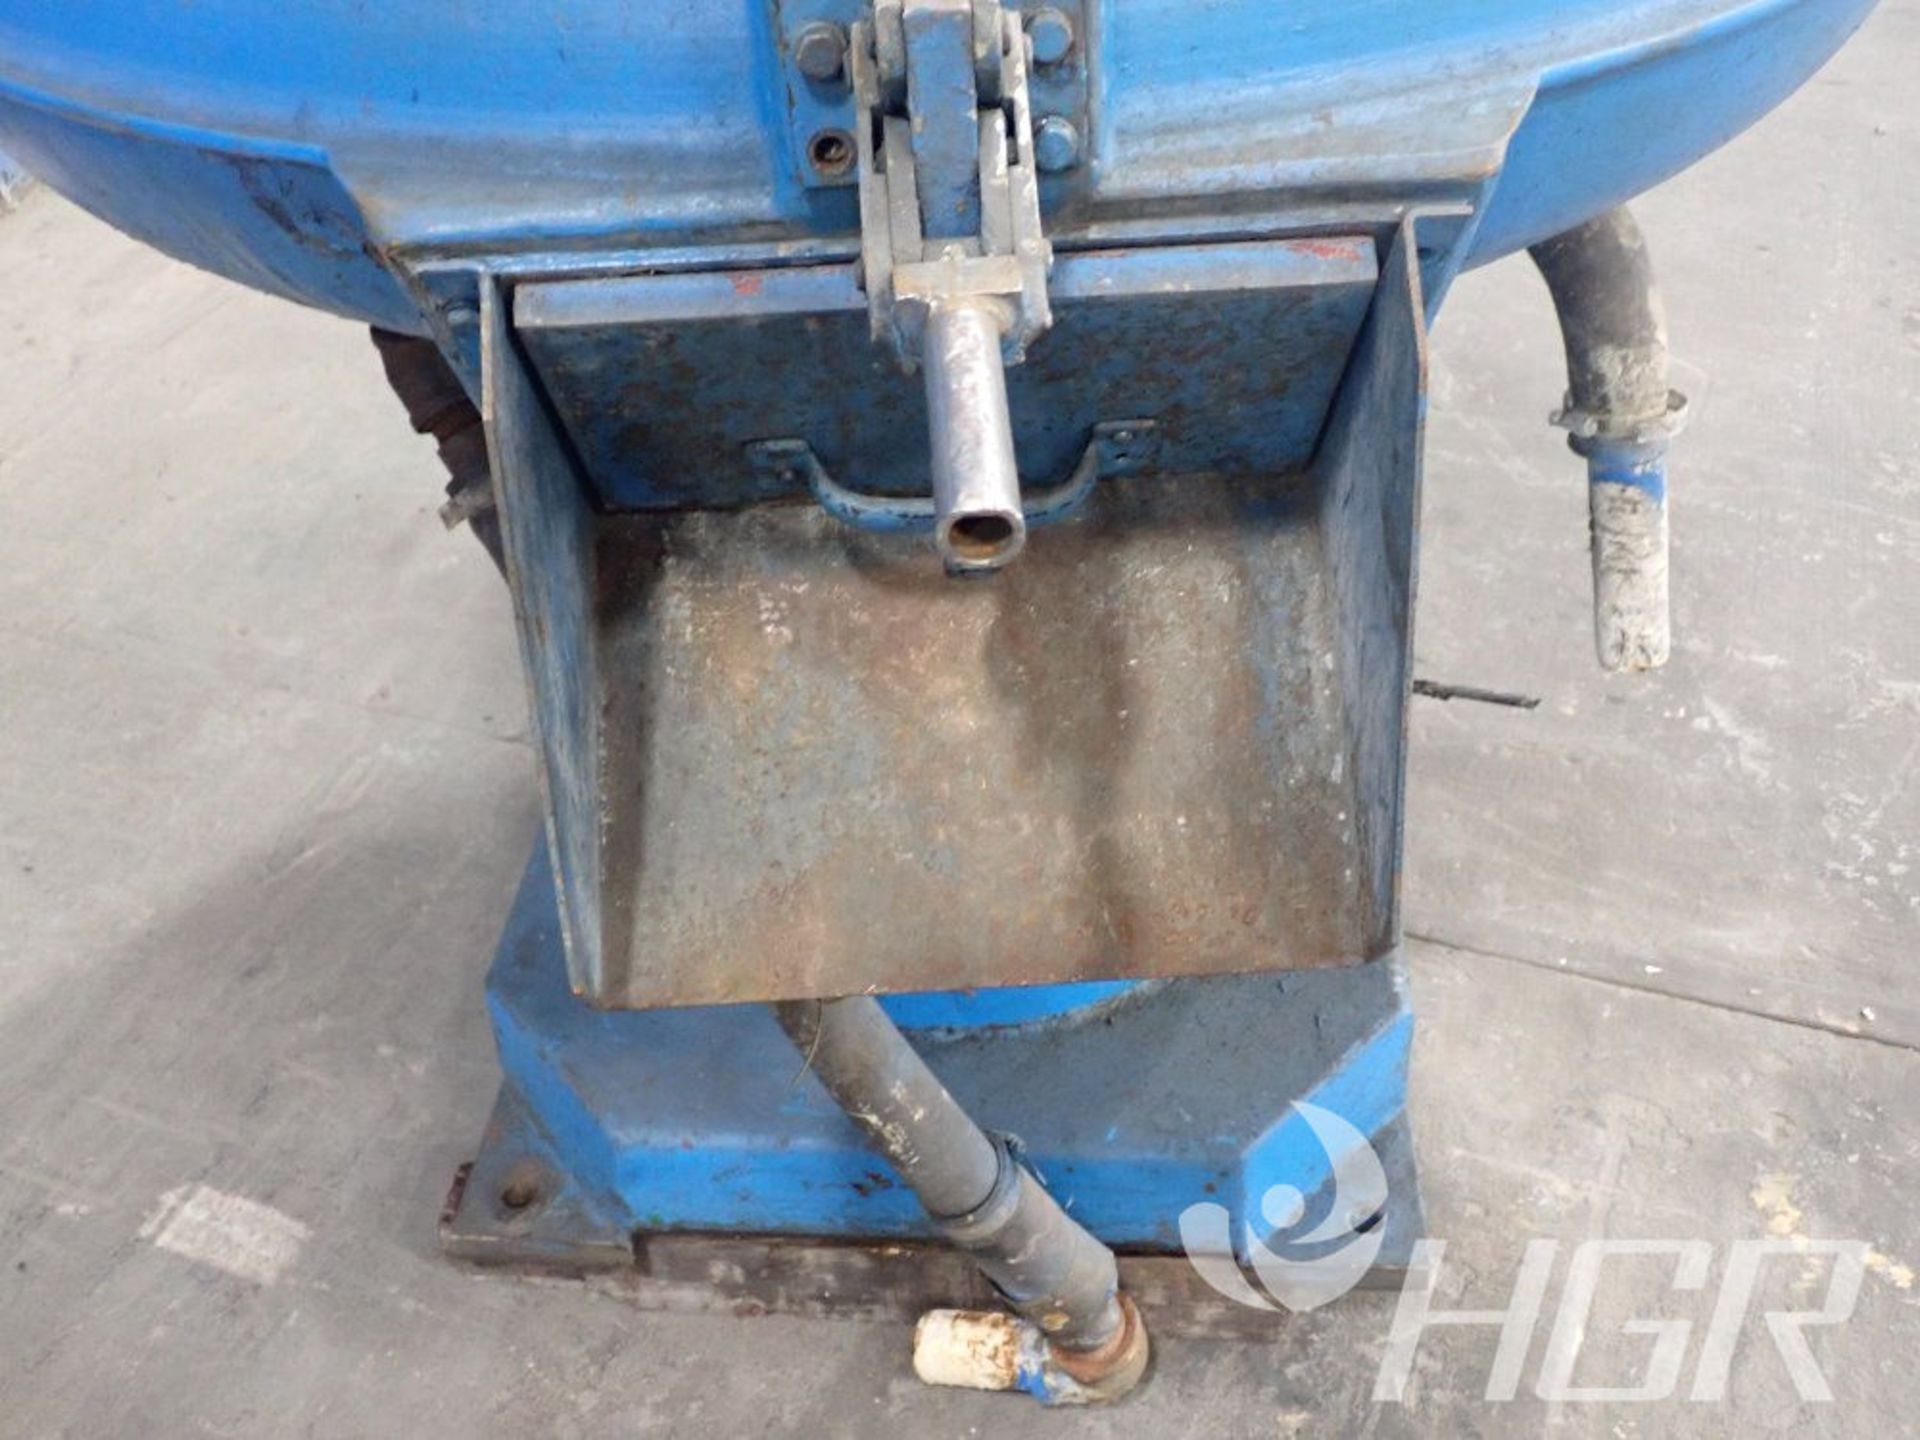 ALMCO VIBRATORY FINISHER, Model OR-5C, Date: n/a; s/n 37803, Approx. Capacity: 36", Power: n/a, - Image 5 of 10